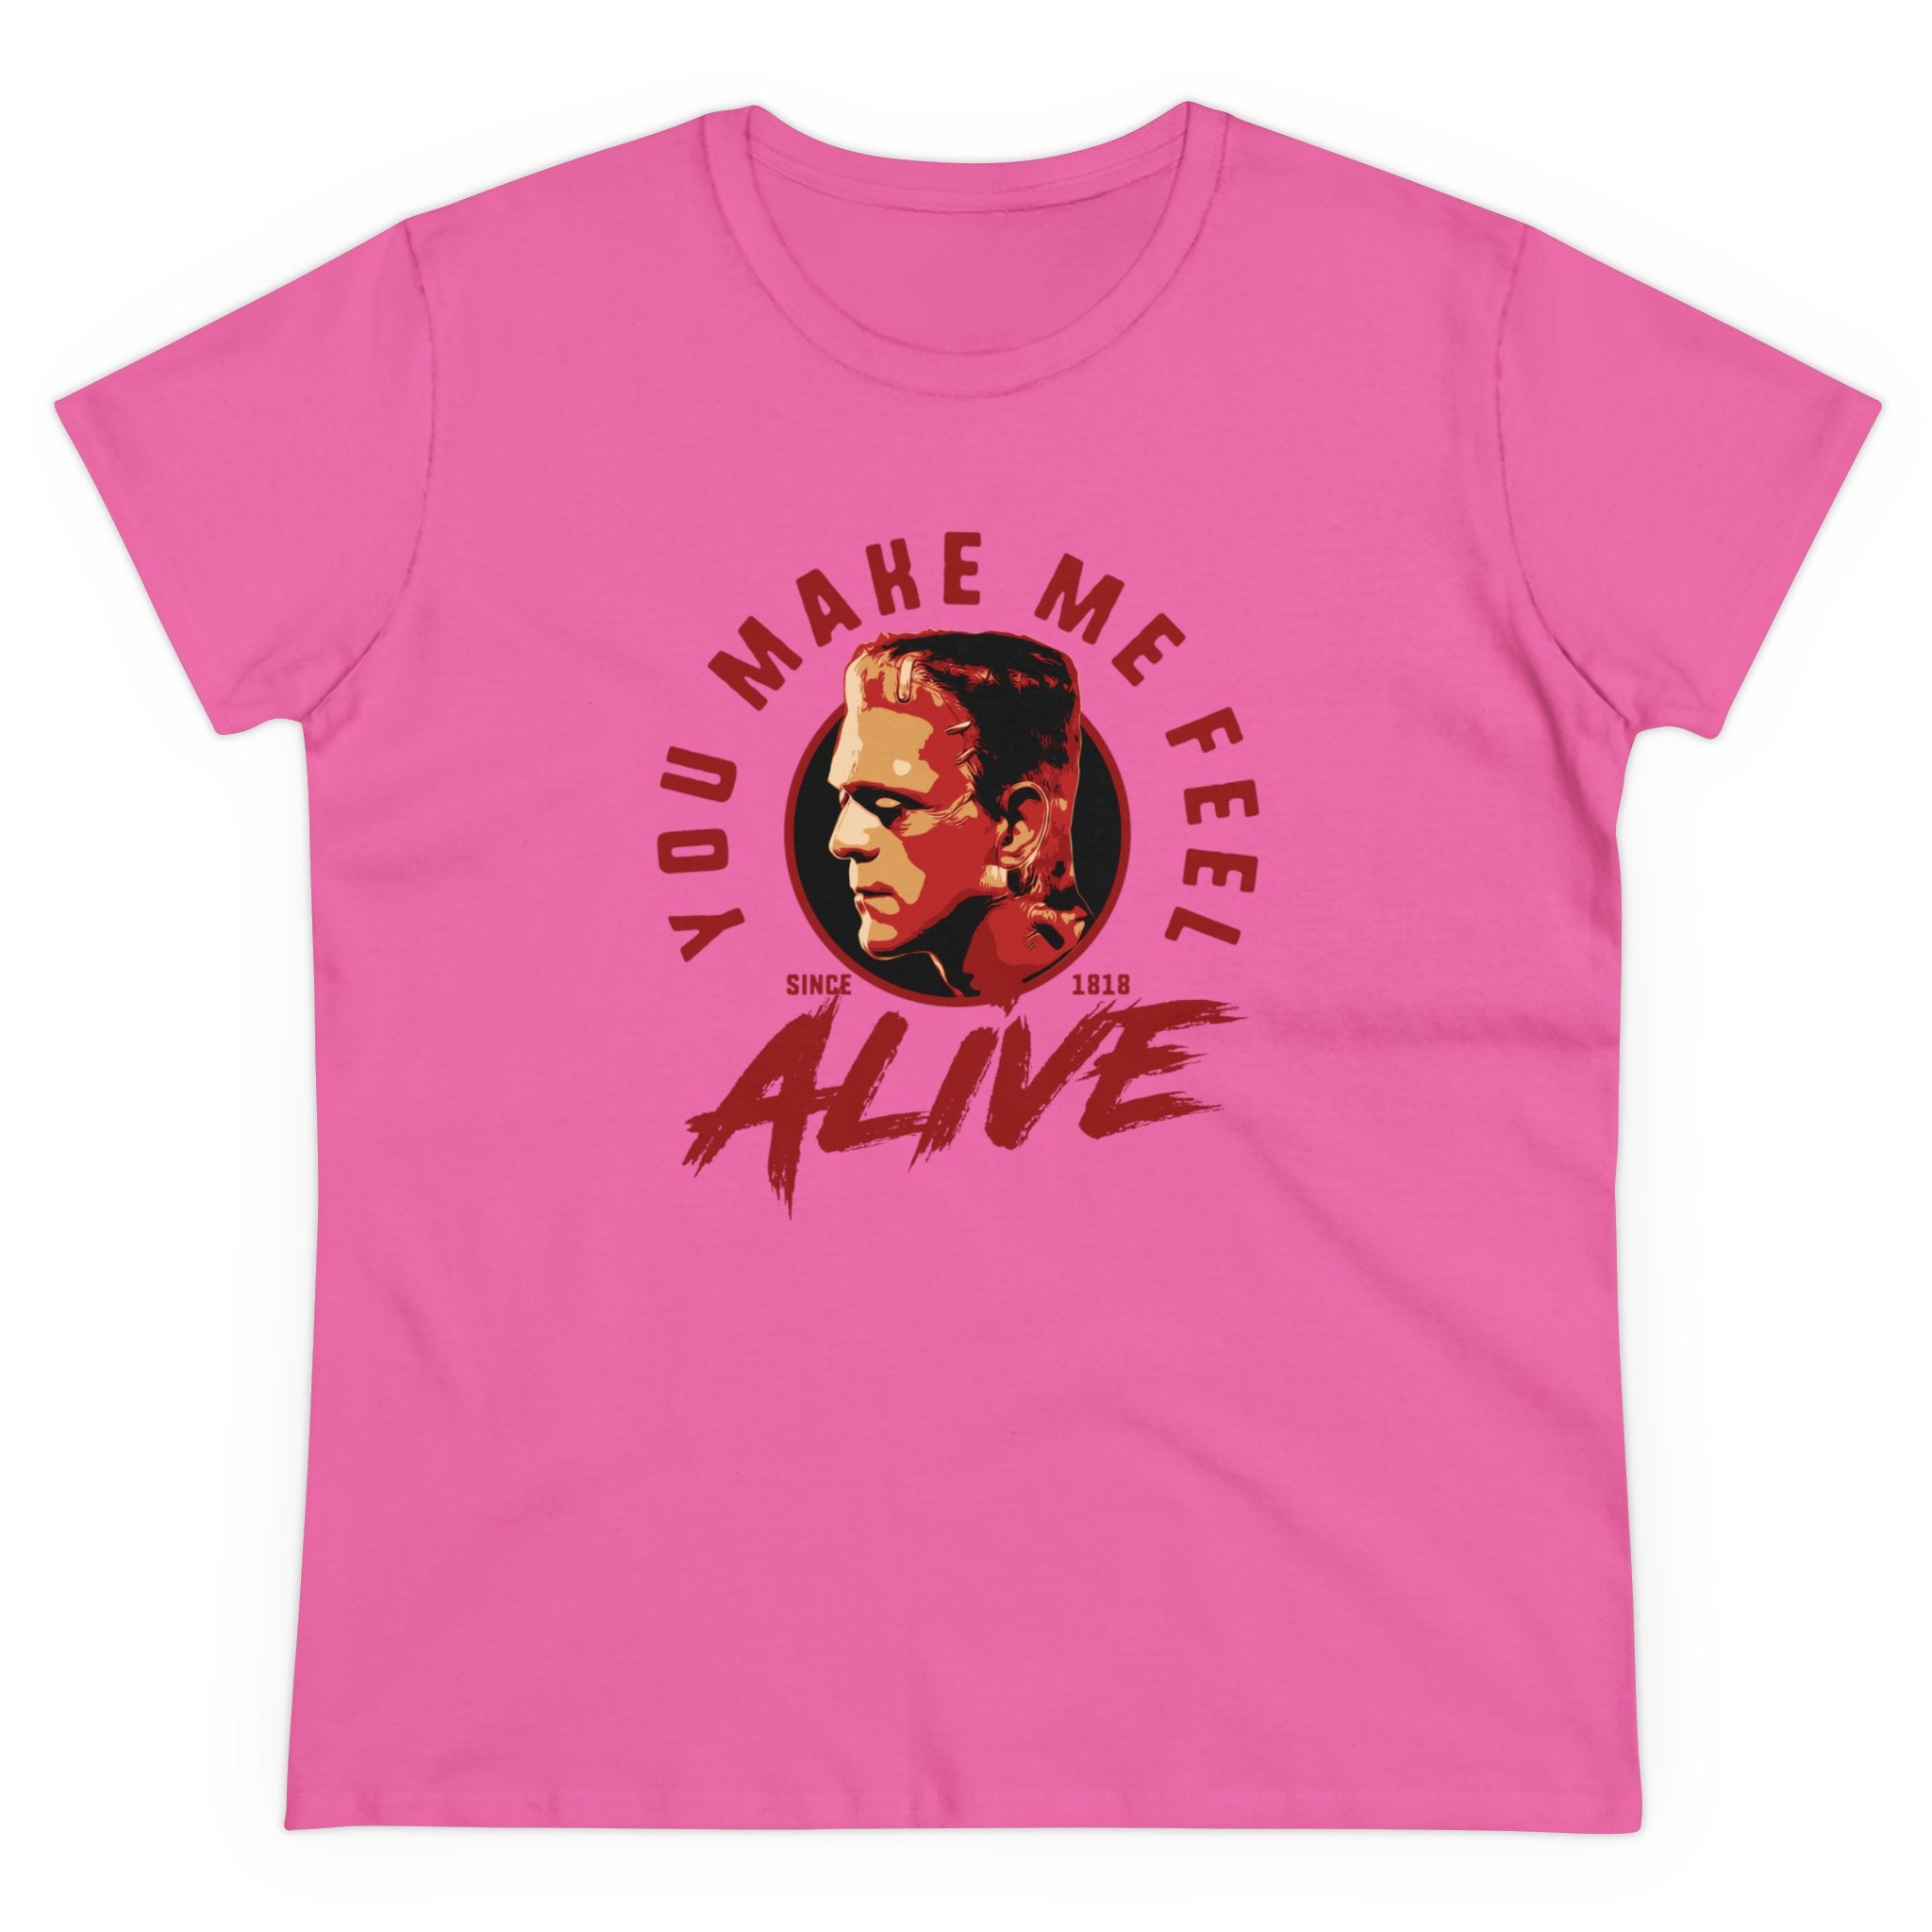 Alive - Women's Tee: This pink T-shirt, a true fashion statement, features a graphic of a person's face alongside the text "You Make Me Feel Alive Since 1818." Pre-shrunk for lasting comfort.